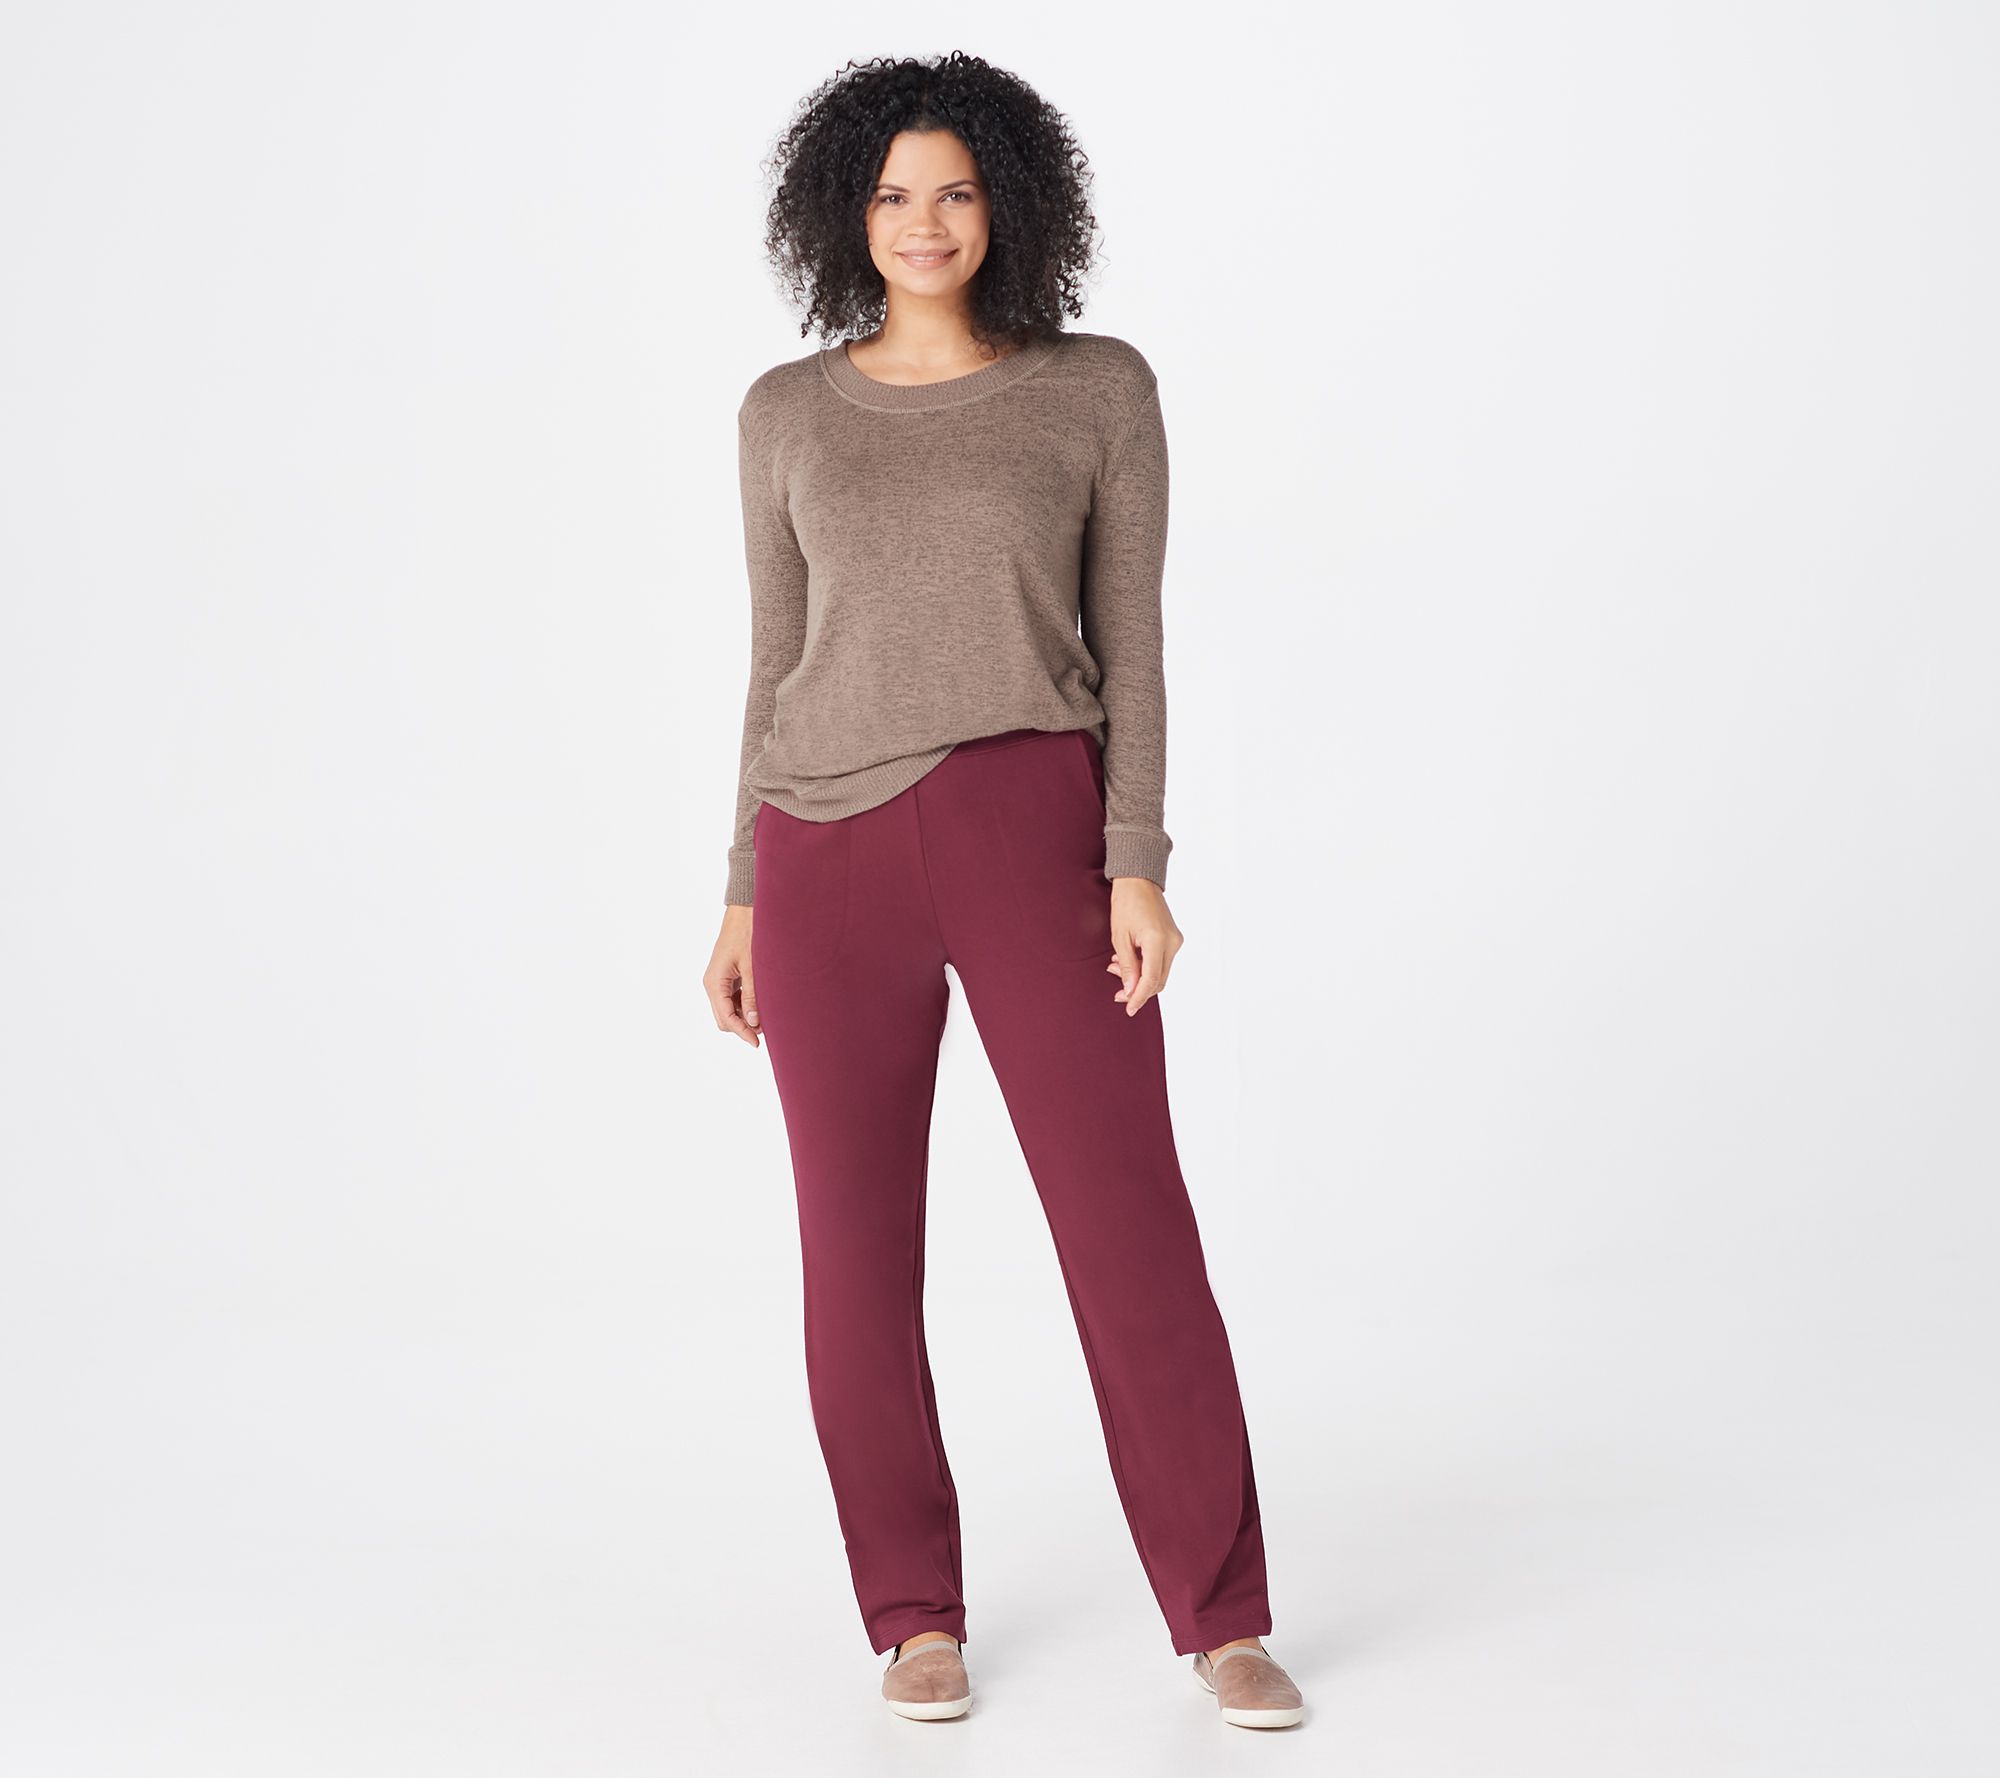 Denim & Co. Active Petite Duo Stretch Leggings with Wide Waistband